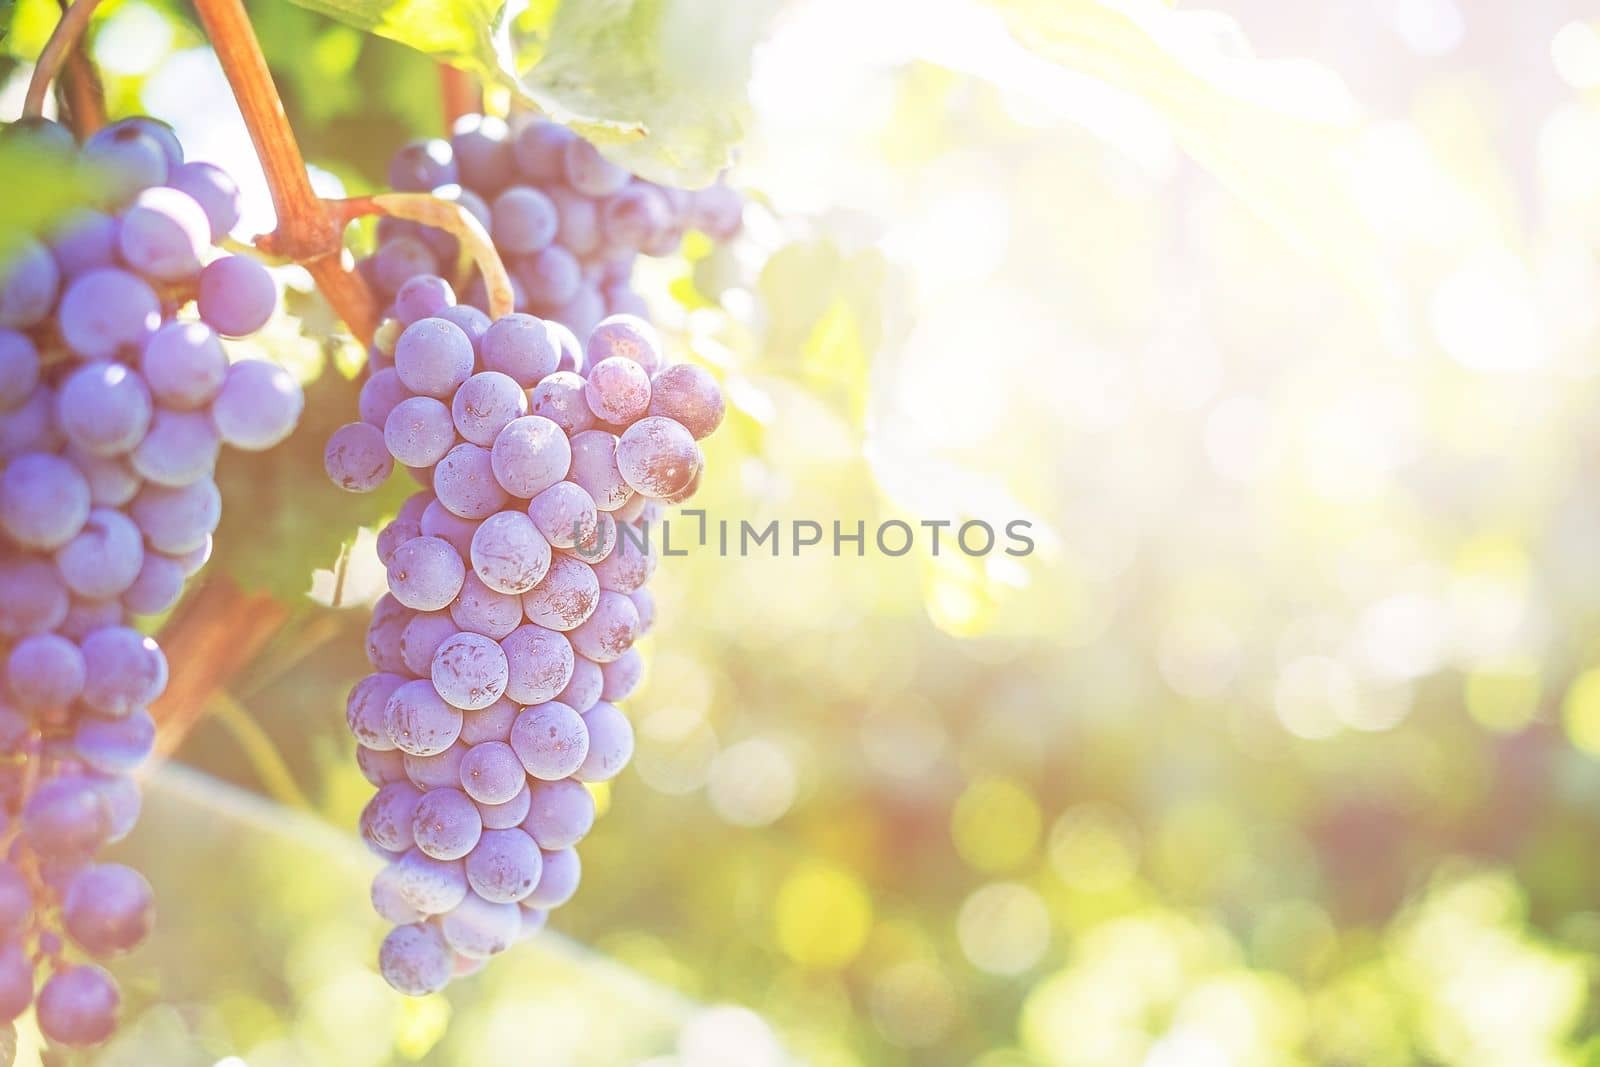 Bunches of red grapes on vine in warm light. Copy space